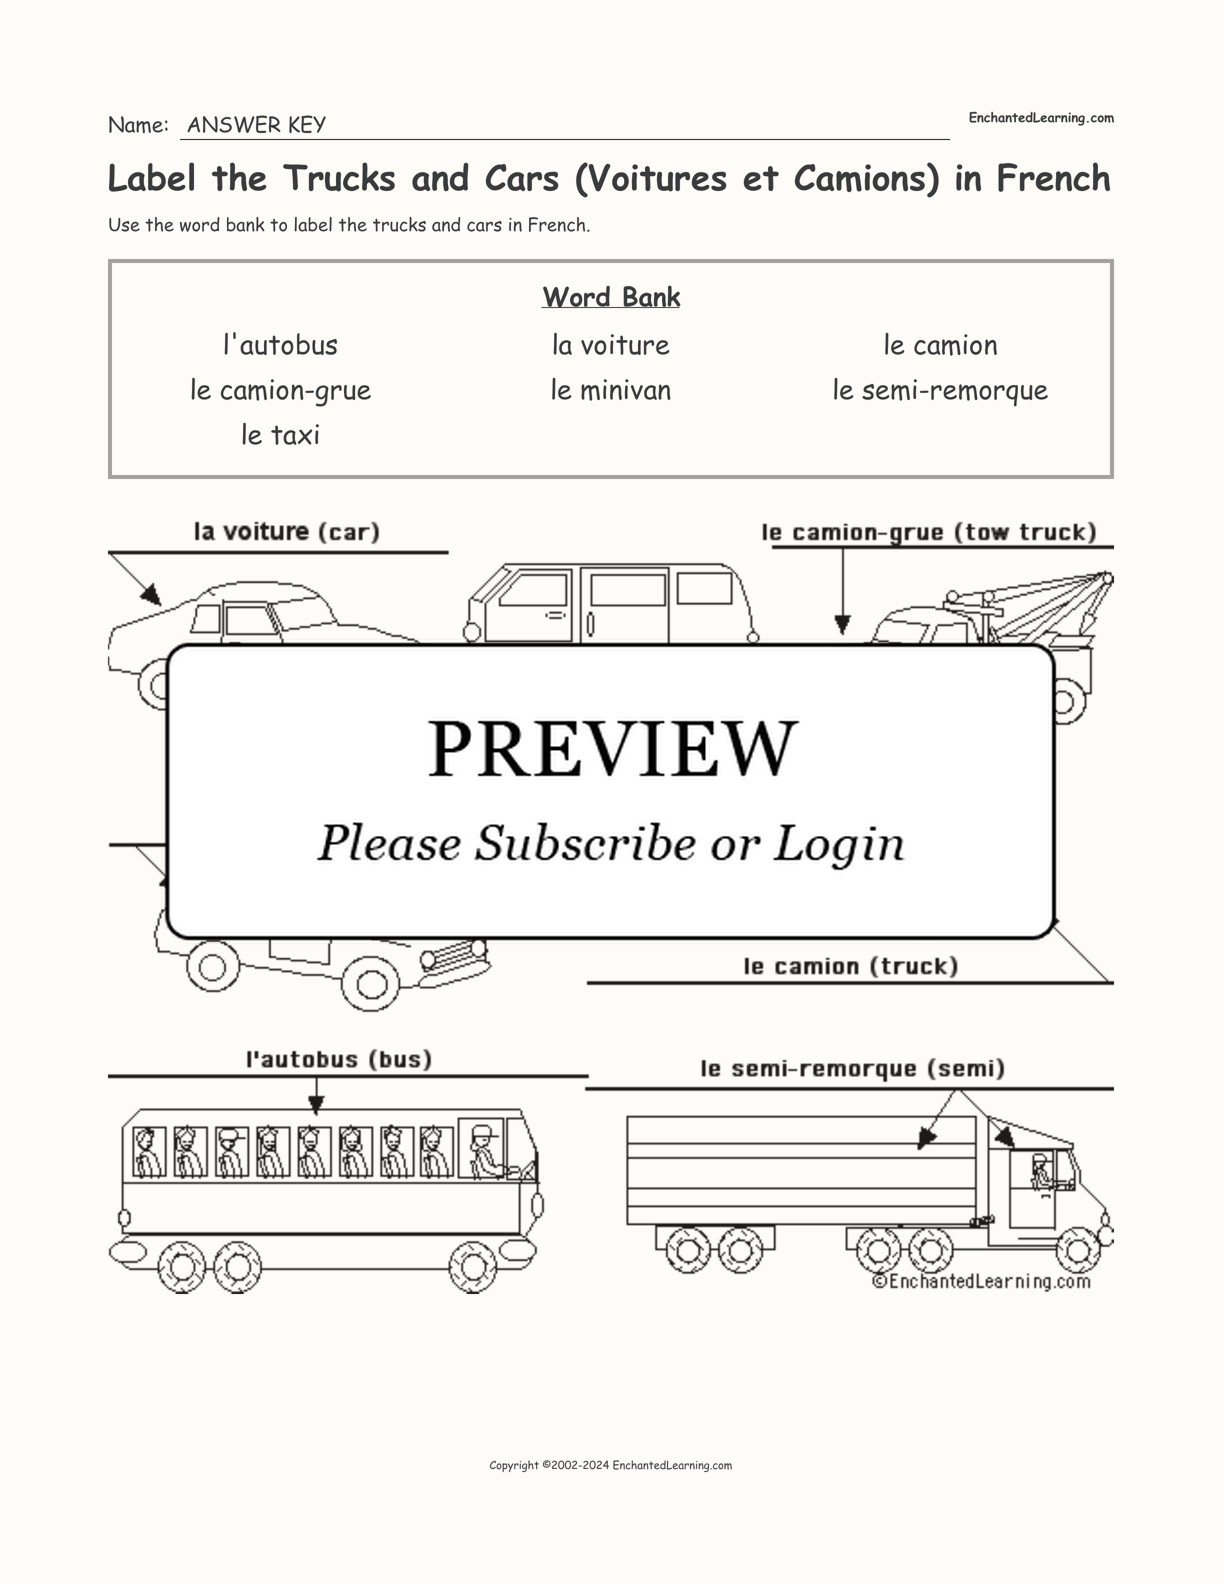 Label the Trucks and Cars (Voitures et Camions) in French interactive worksheet page 2